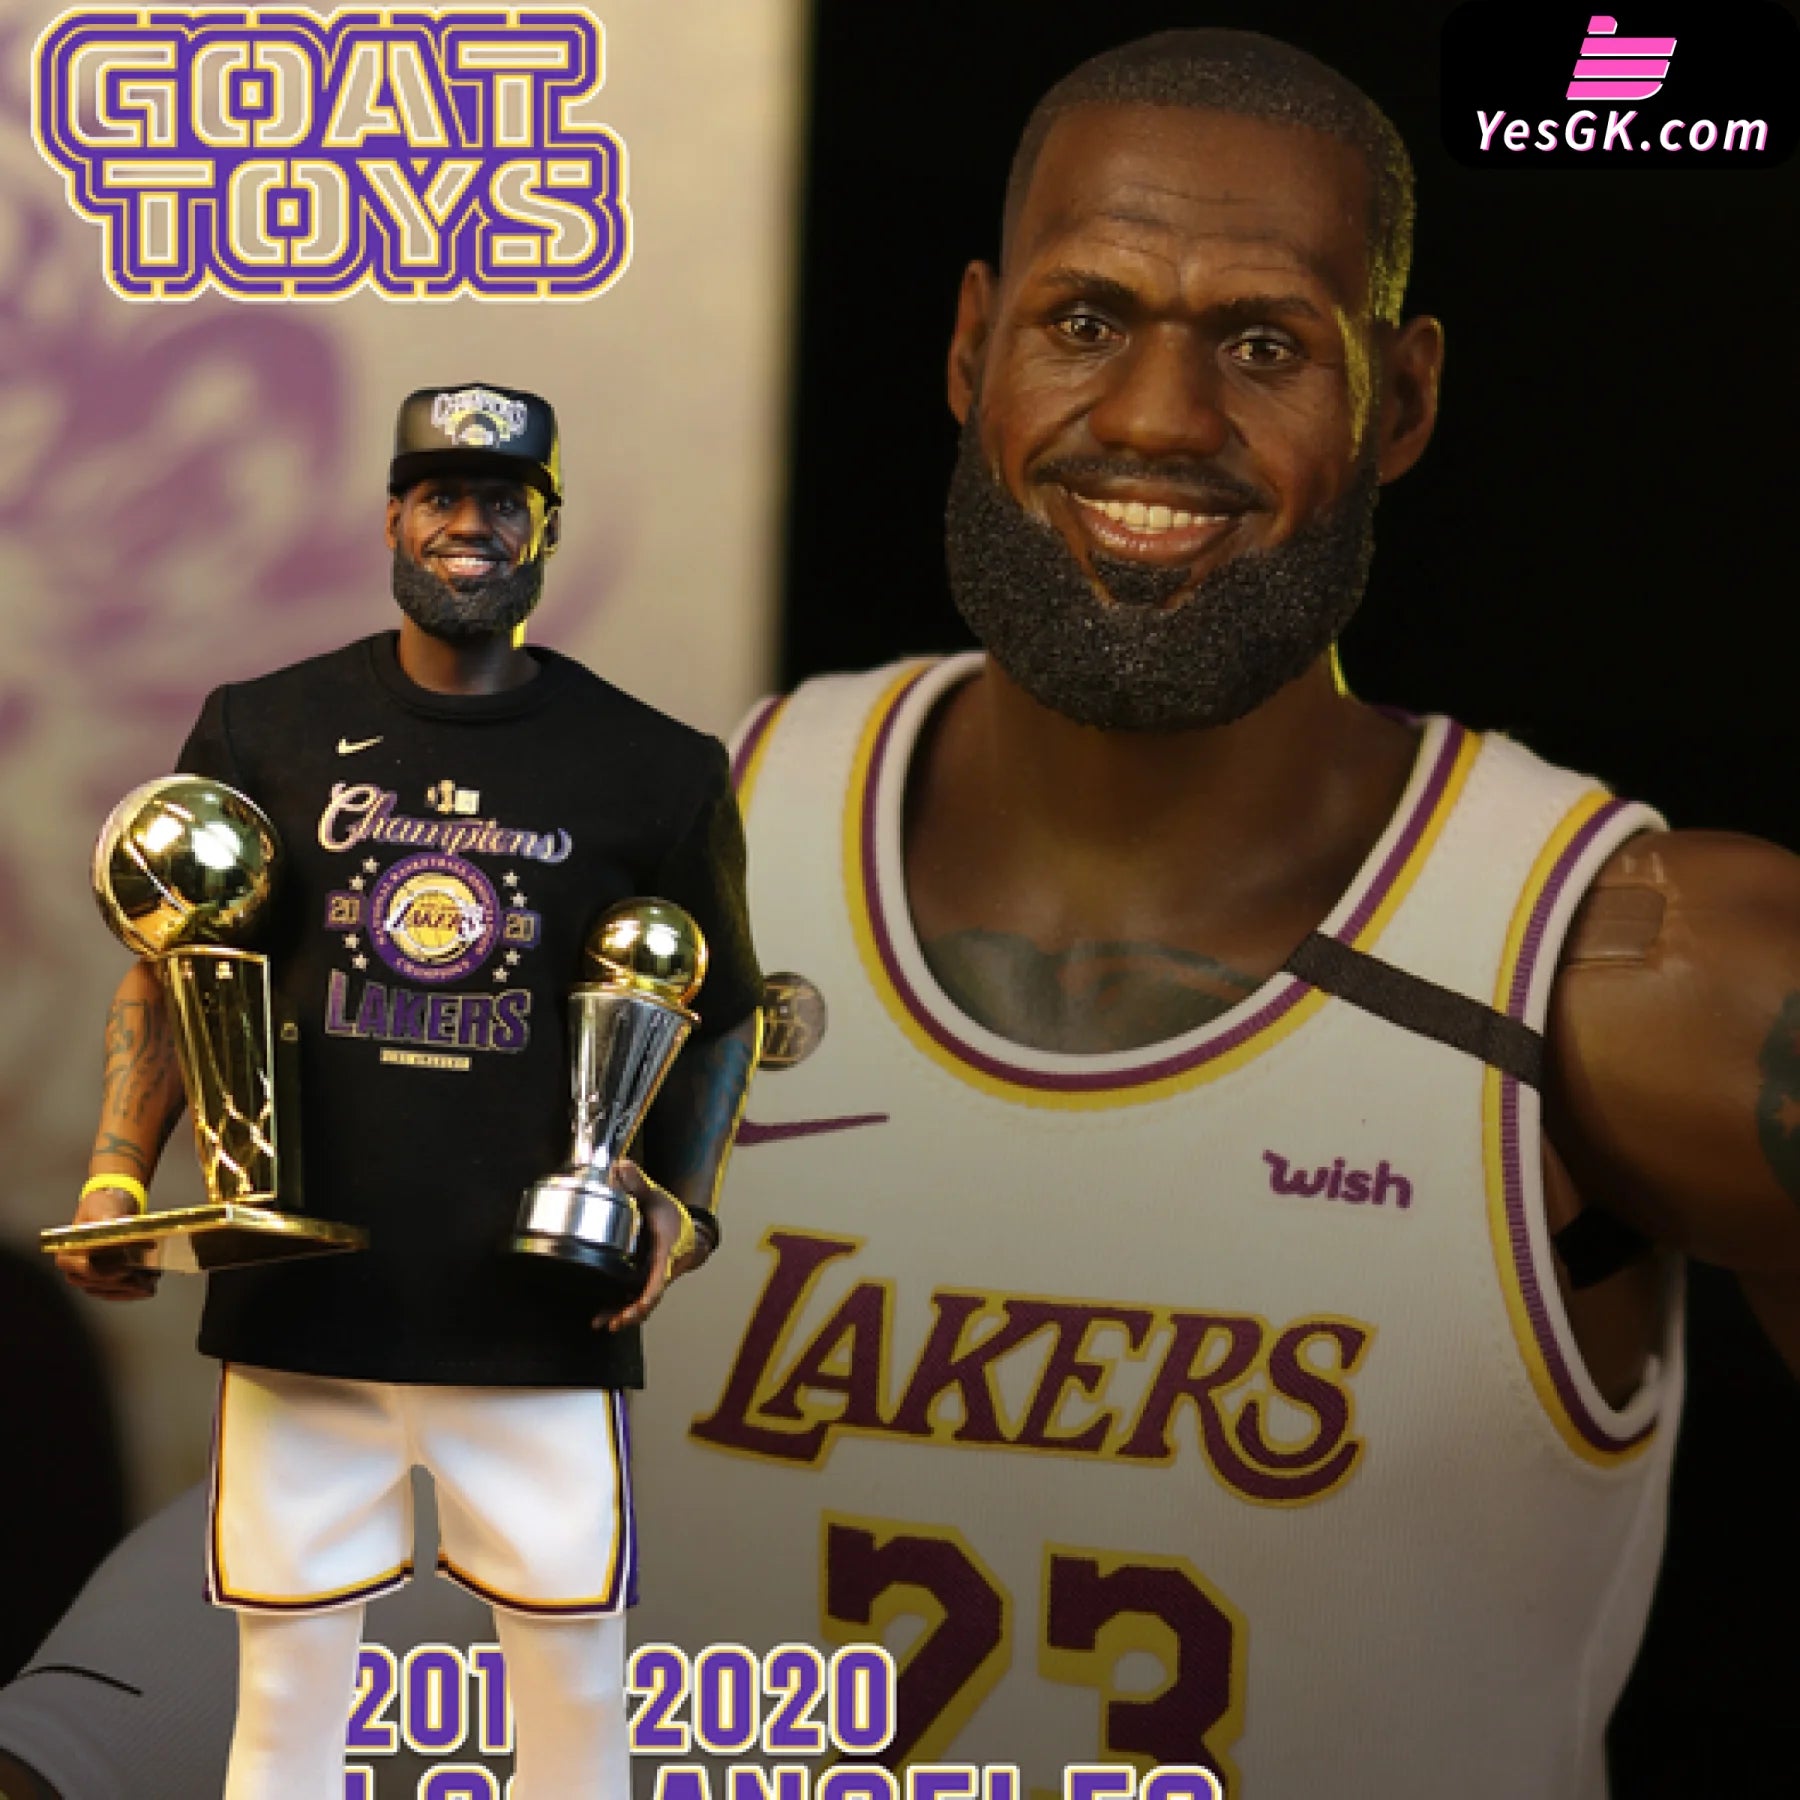 Nba James Lakers Championship Suit Statue - Goat Toys Studio [Pre-Order] Others